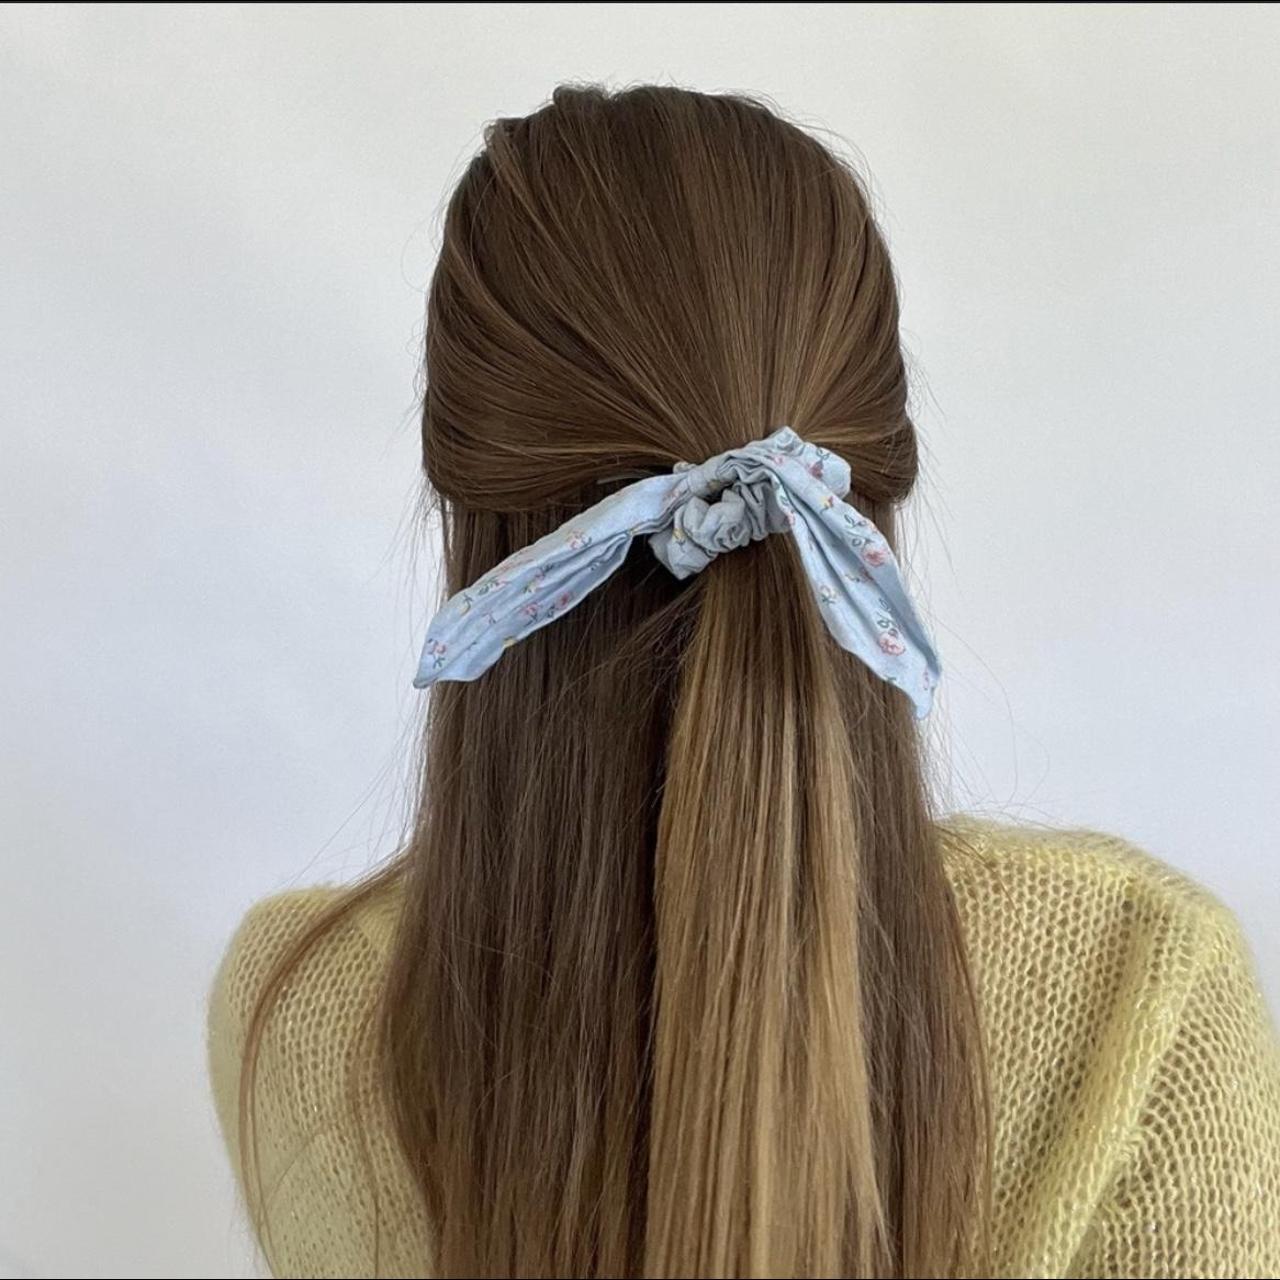 LoveShackFancy Women's Blue and White Hair-accessories